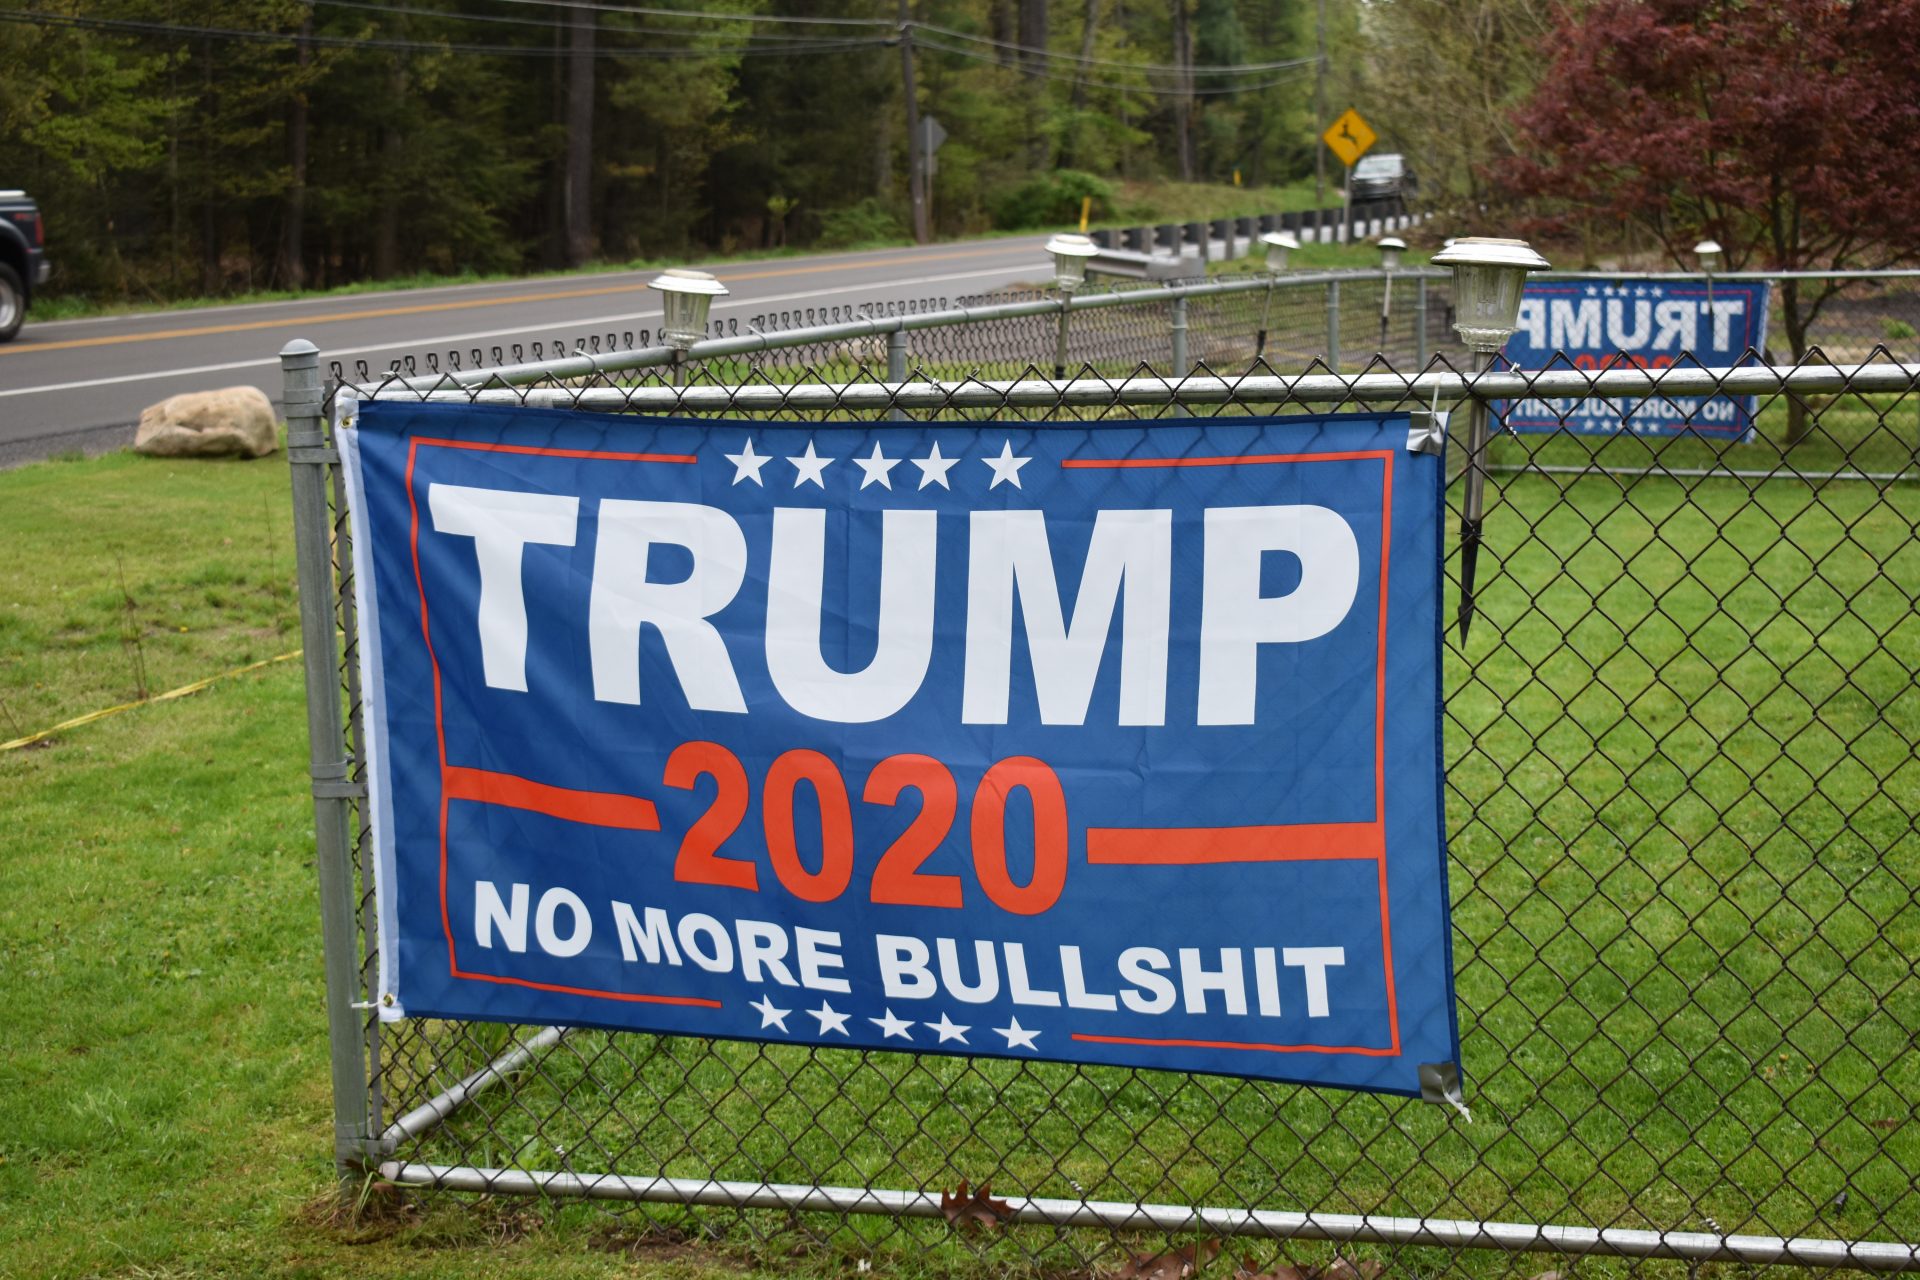 Daniel Klein hung up this flag, seen on May 3, 2019, in support of Republican Donald Trump. Klein has two such flags outside his Wyoming County home.